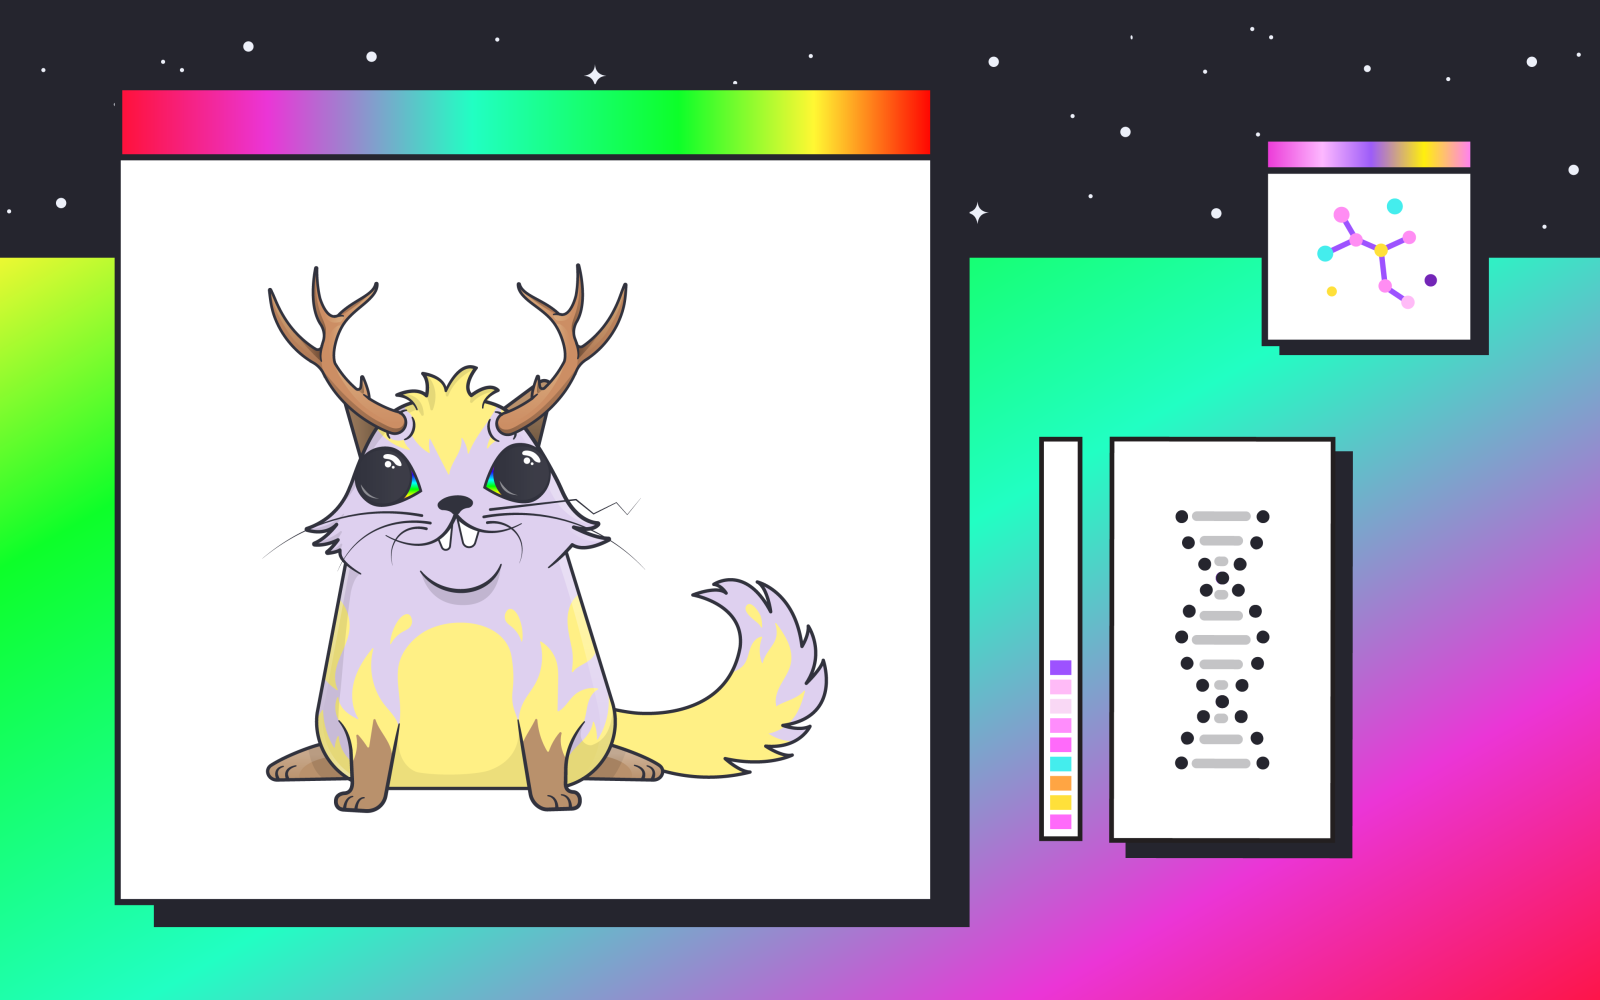 The picture shows a so-called cryptokitty and a DNA helix.